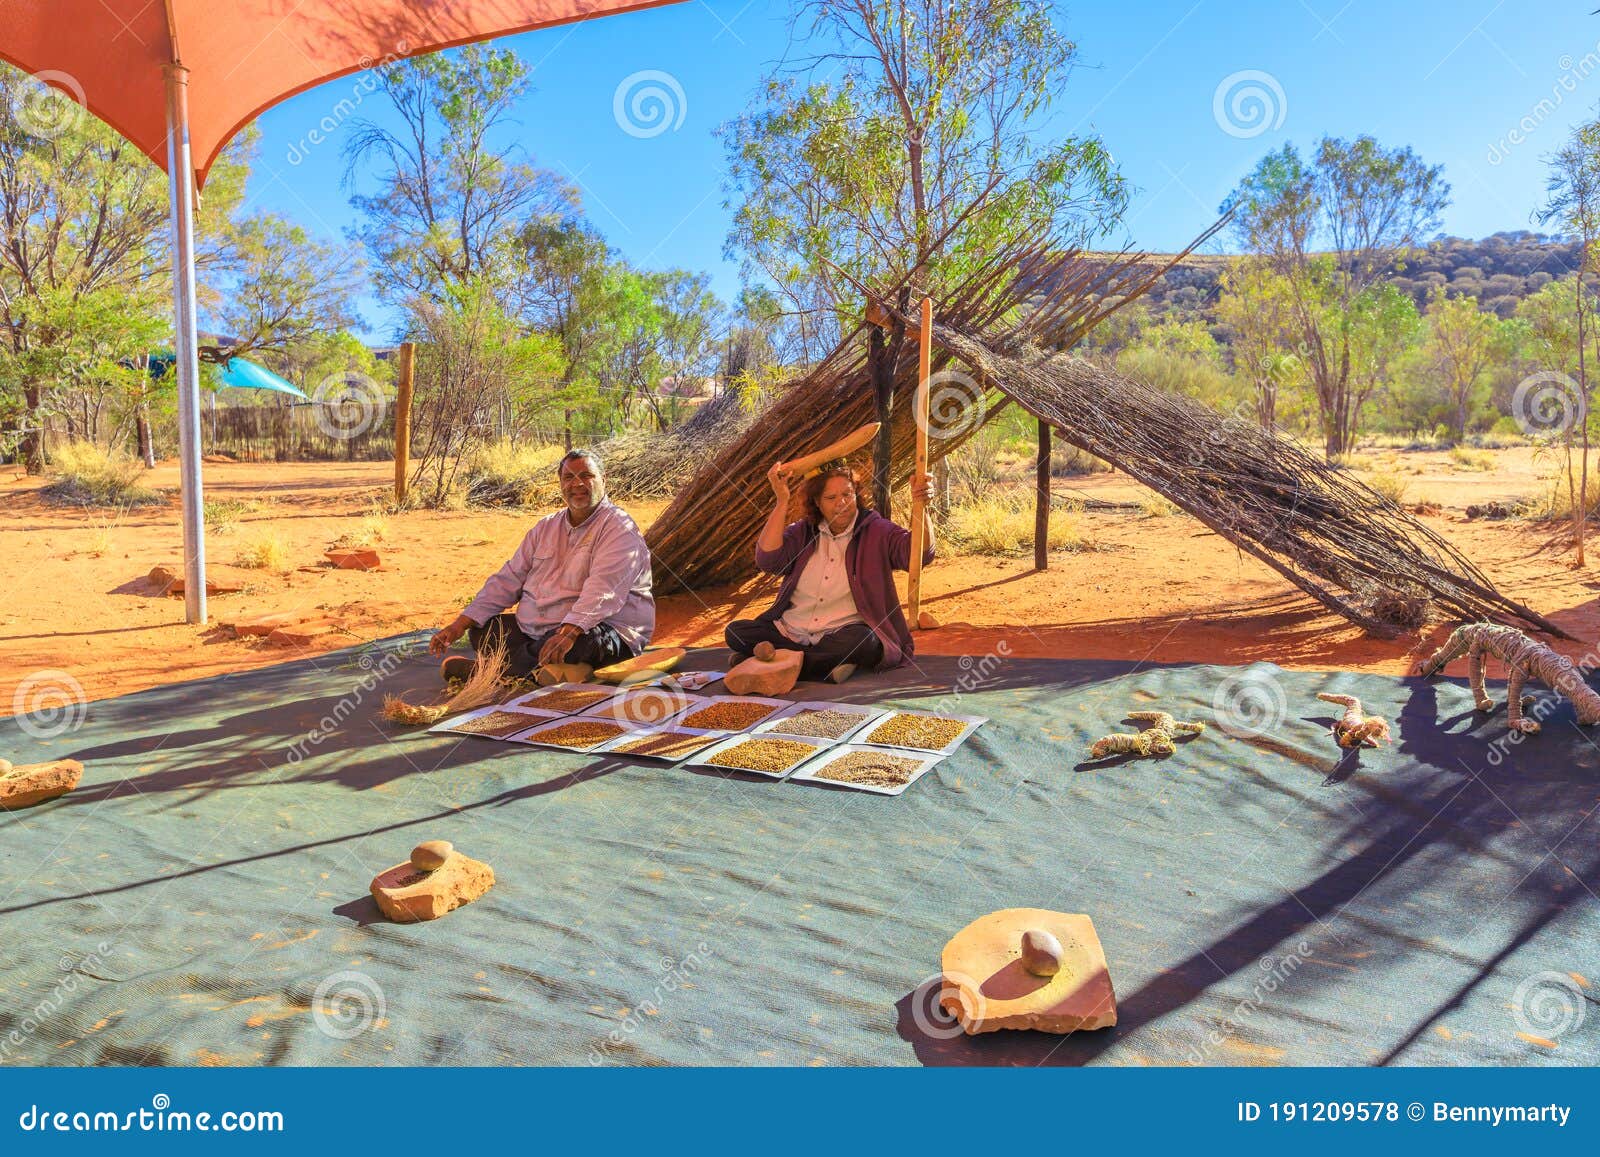 Australian Aboriginal Cultural Tour Editorial Stock Photo - Image harvested, highway: